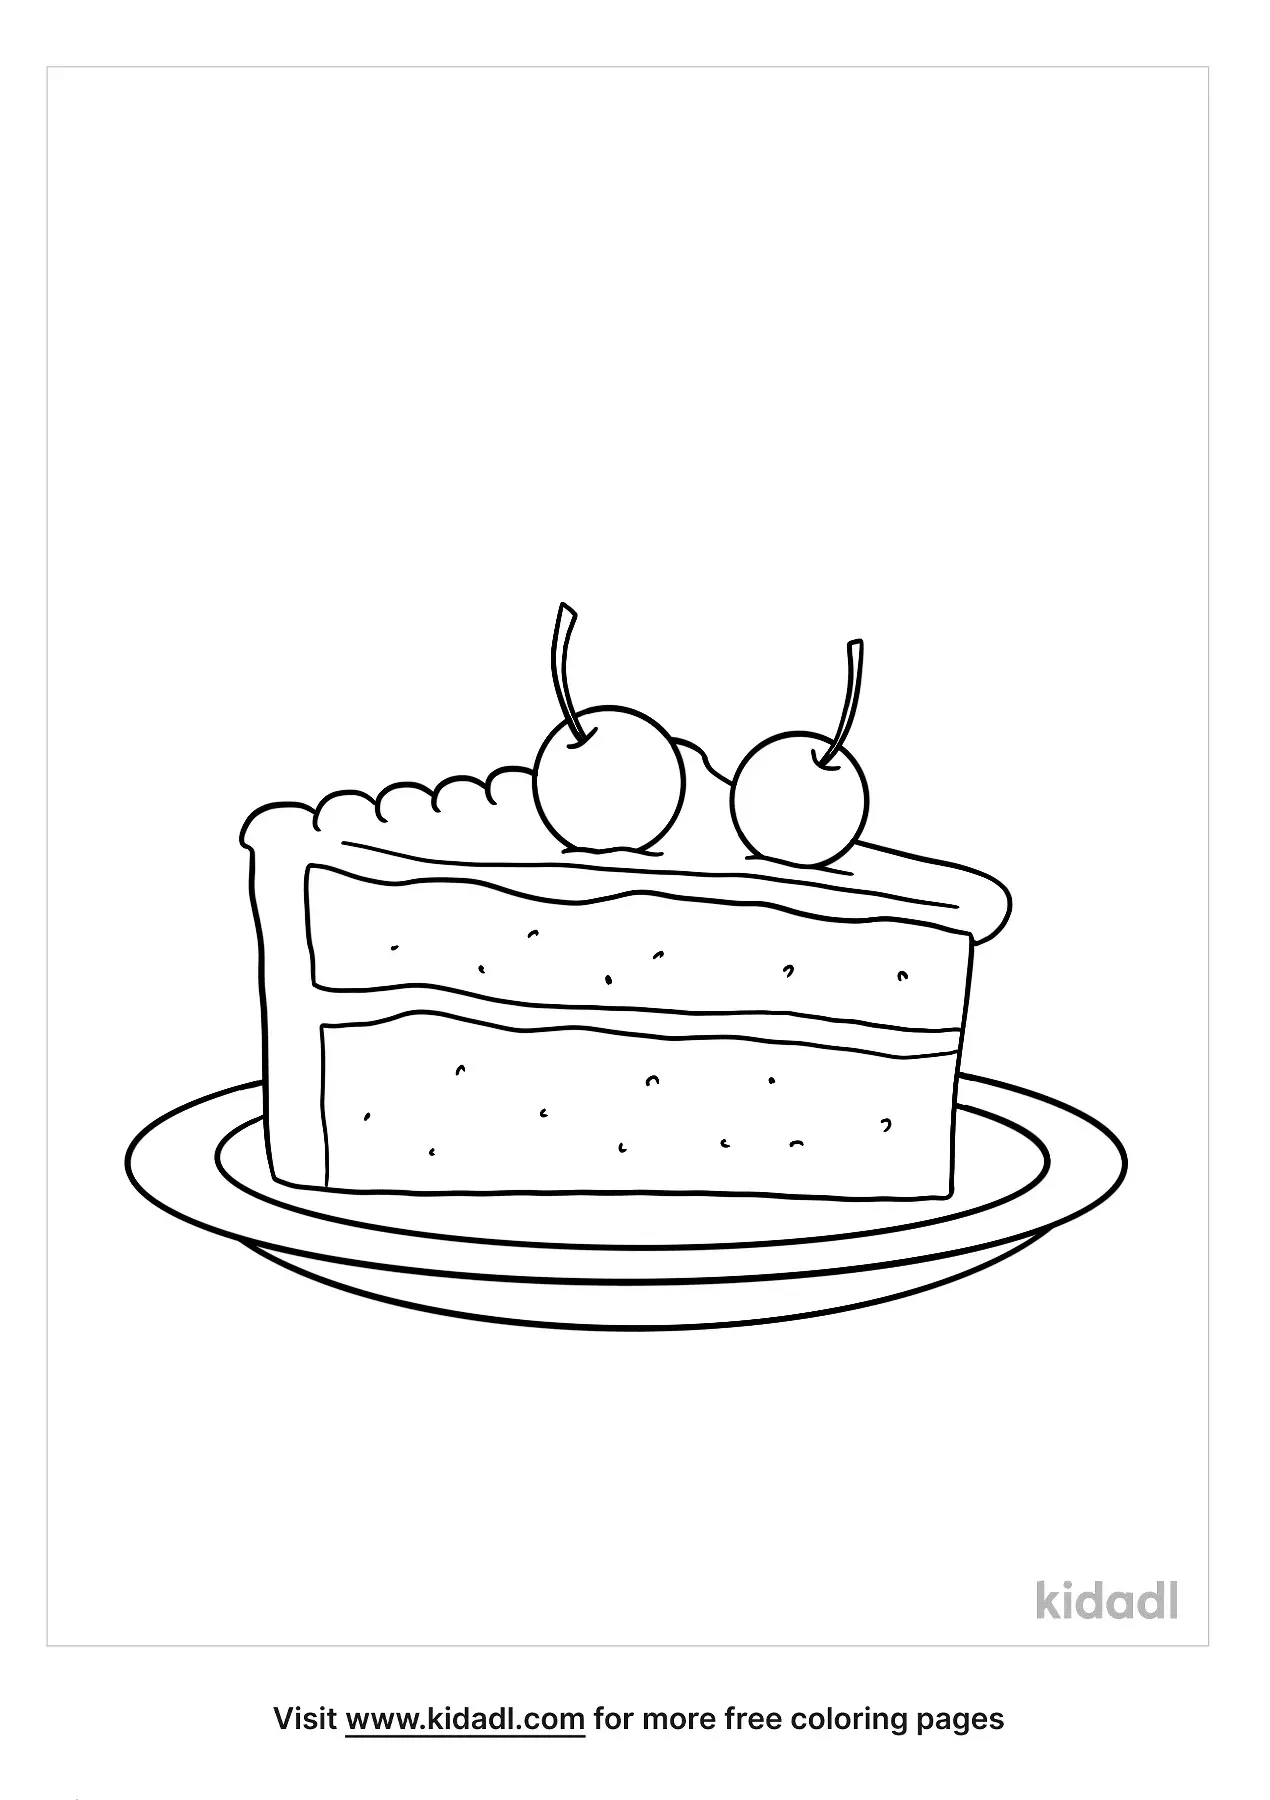 Slice Cake Coloring Page | Candy coloring pages, Cupcake coloring pages,  Bunny coloring pages